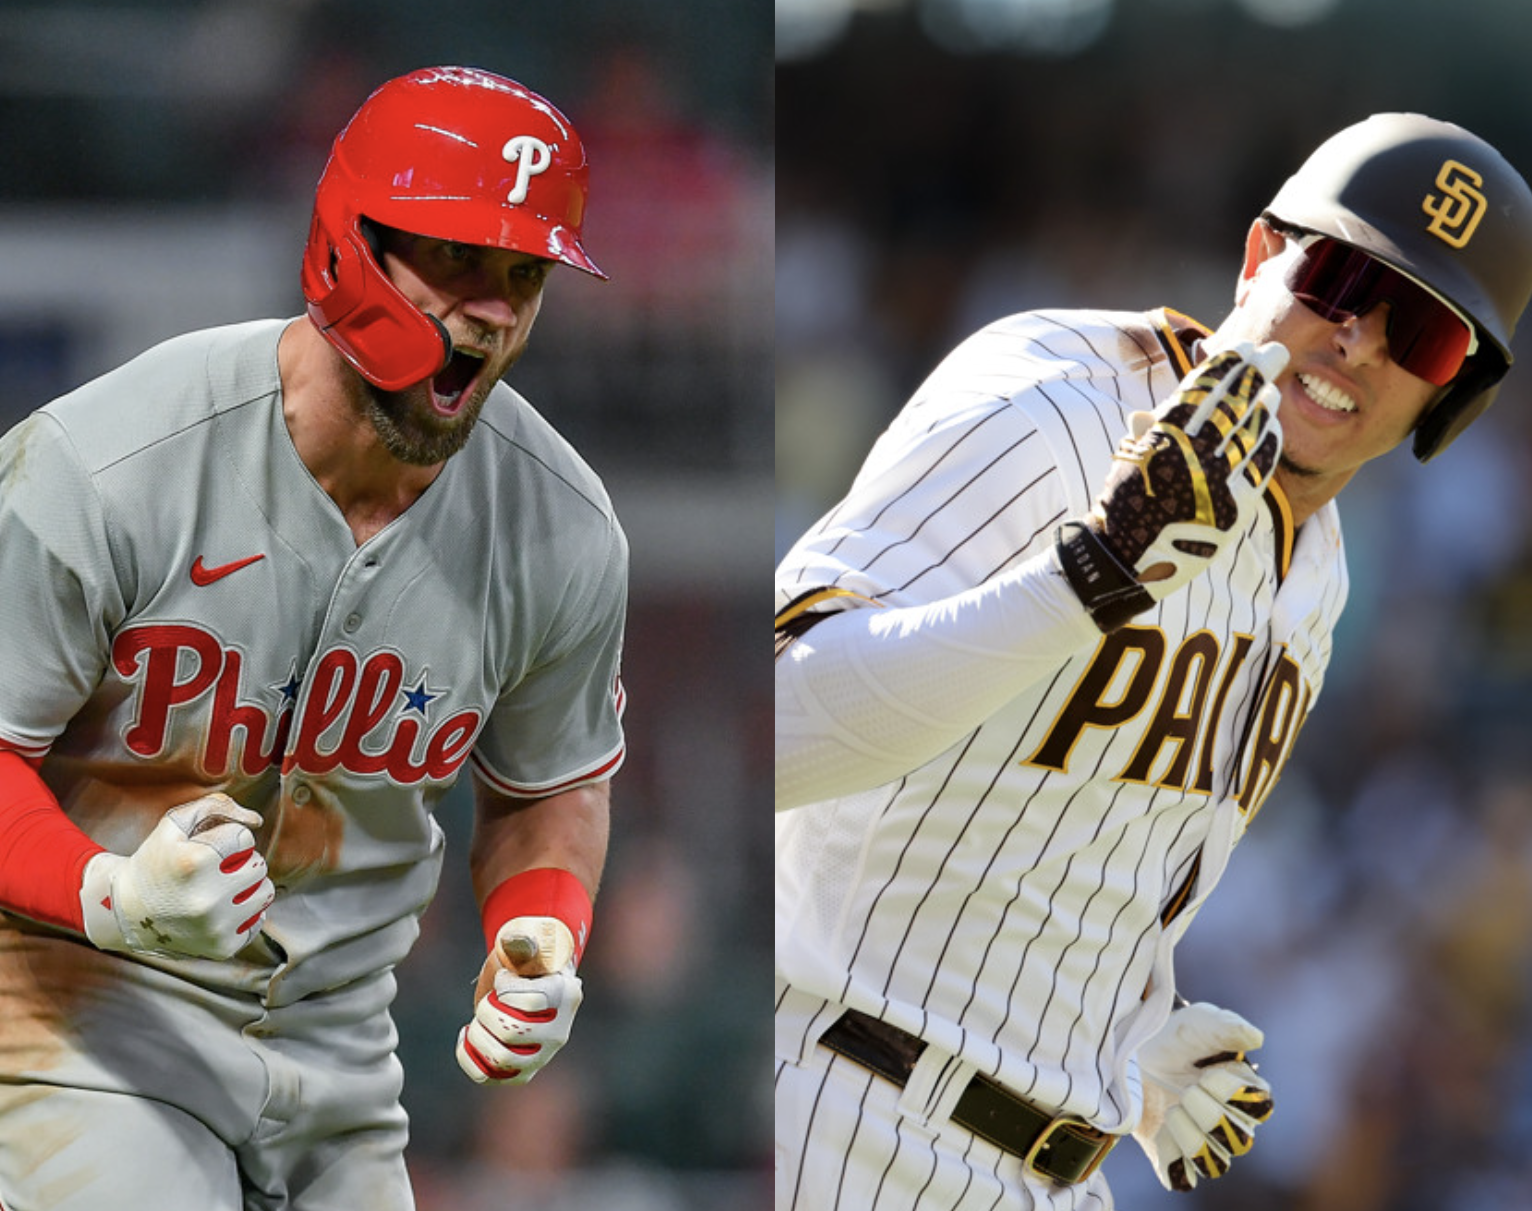 Through 4 years, who has been better — Bryce Harper or Manny